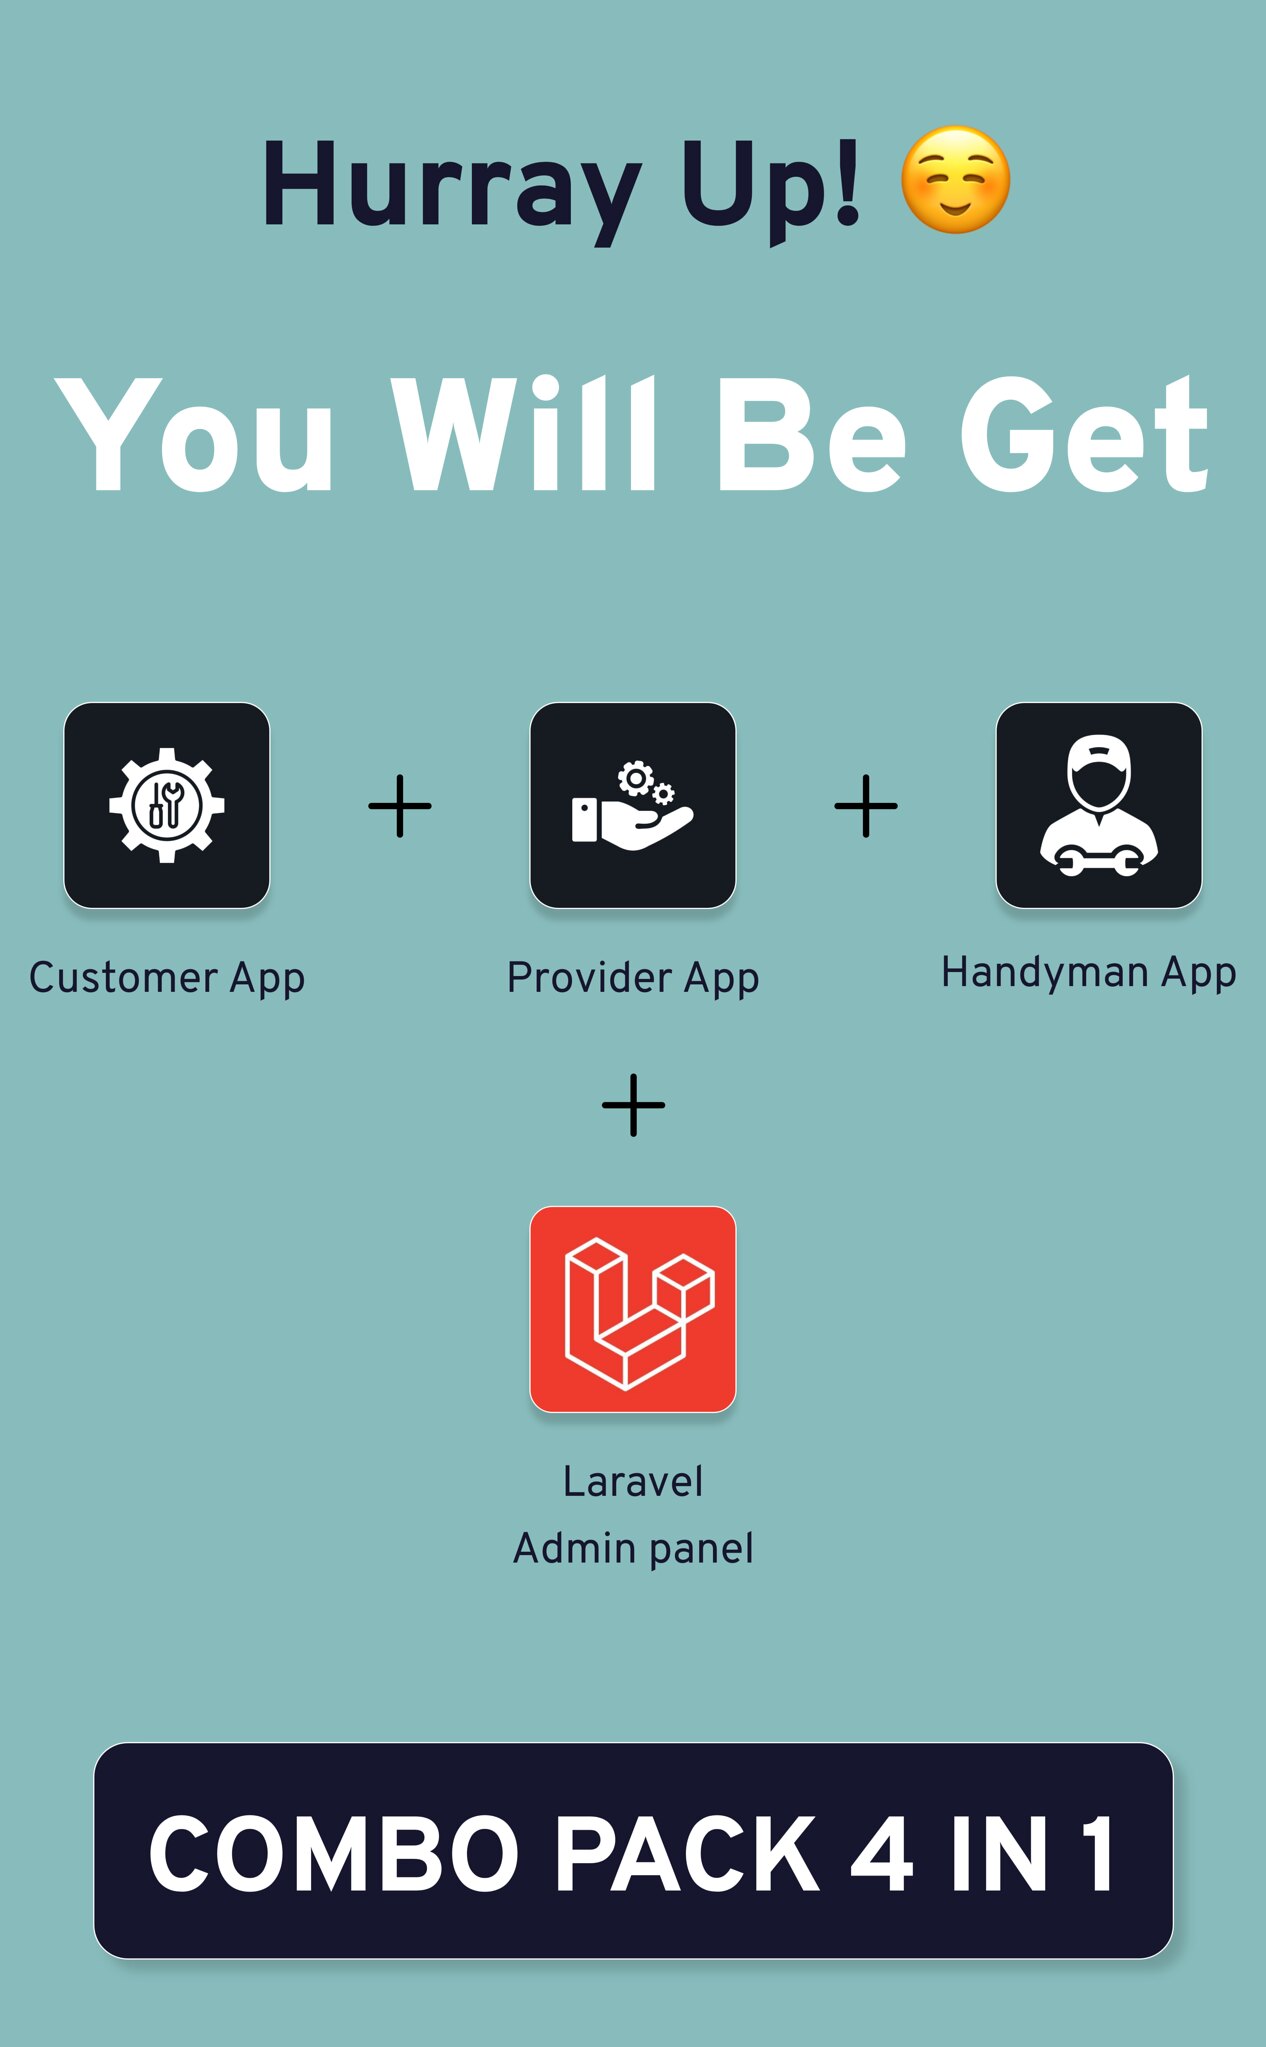 Handy service - On-Demand Home Services, Business Listing, Handyman Booking iOS App with Admin Panel - 2